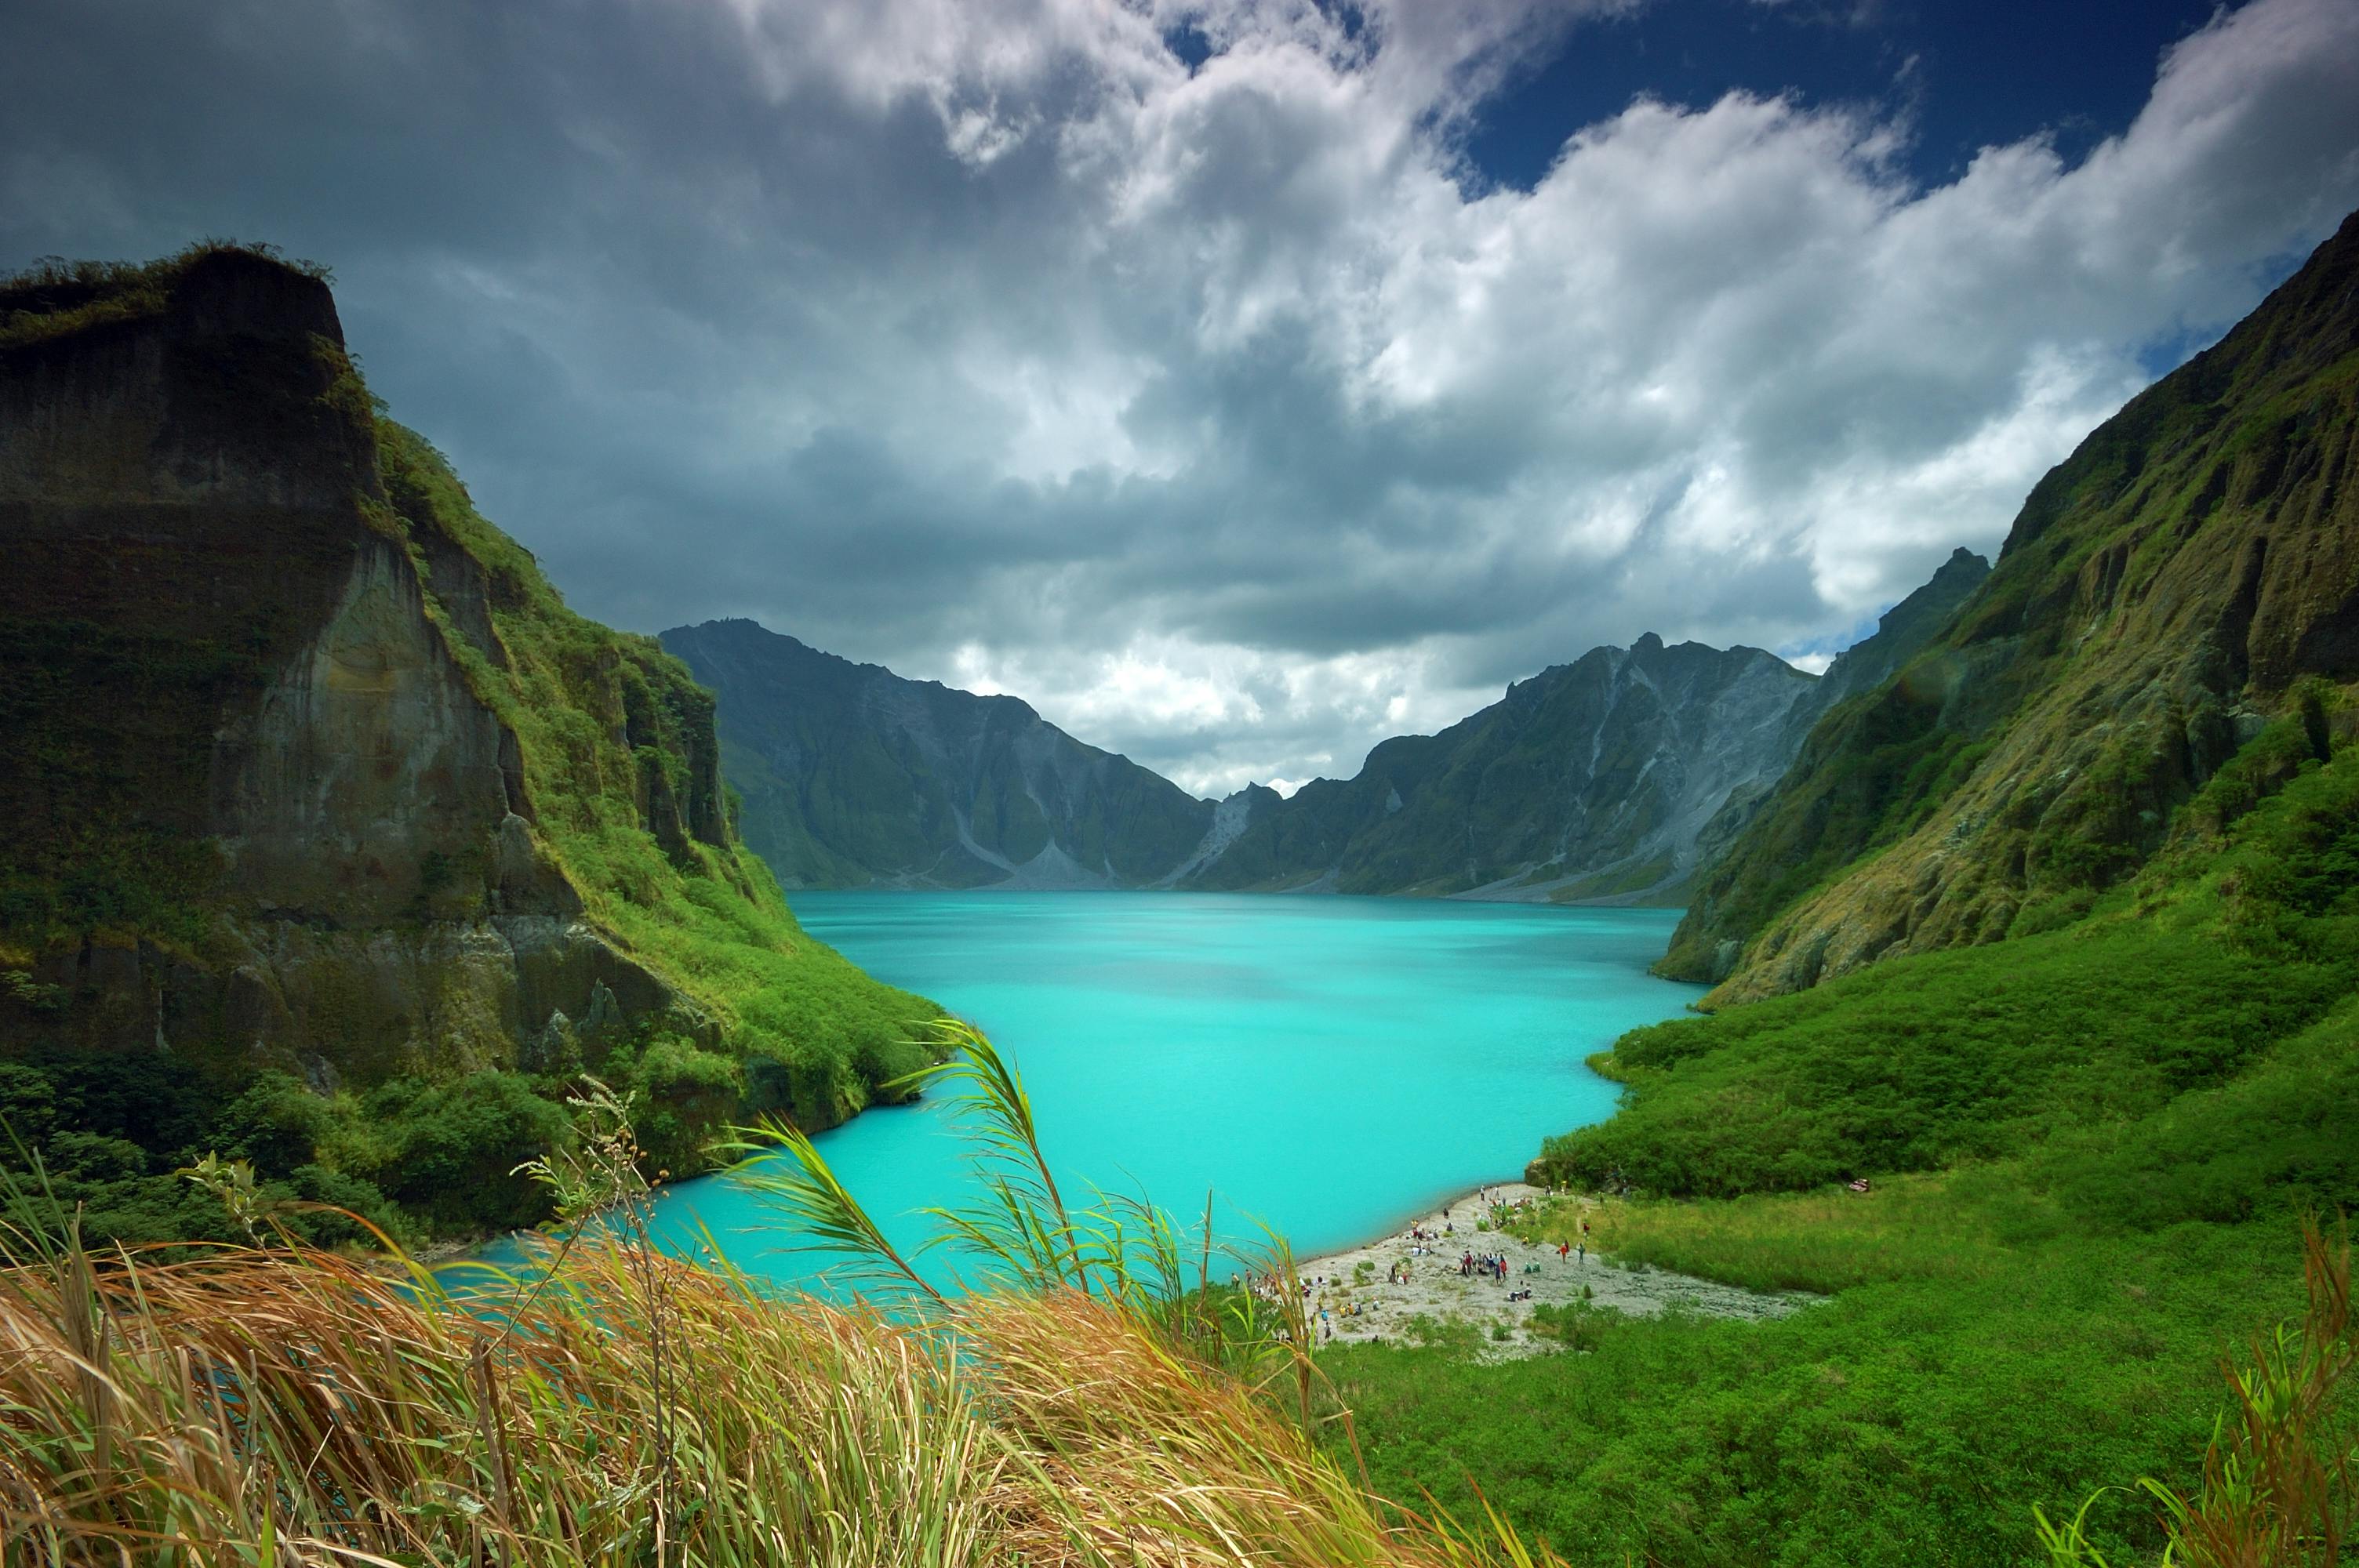 Blue waters in Mt. Pinatubo Crater Lake